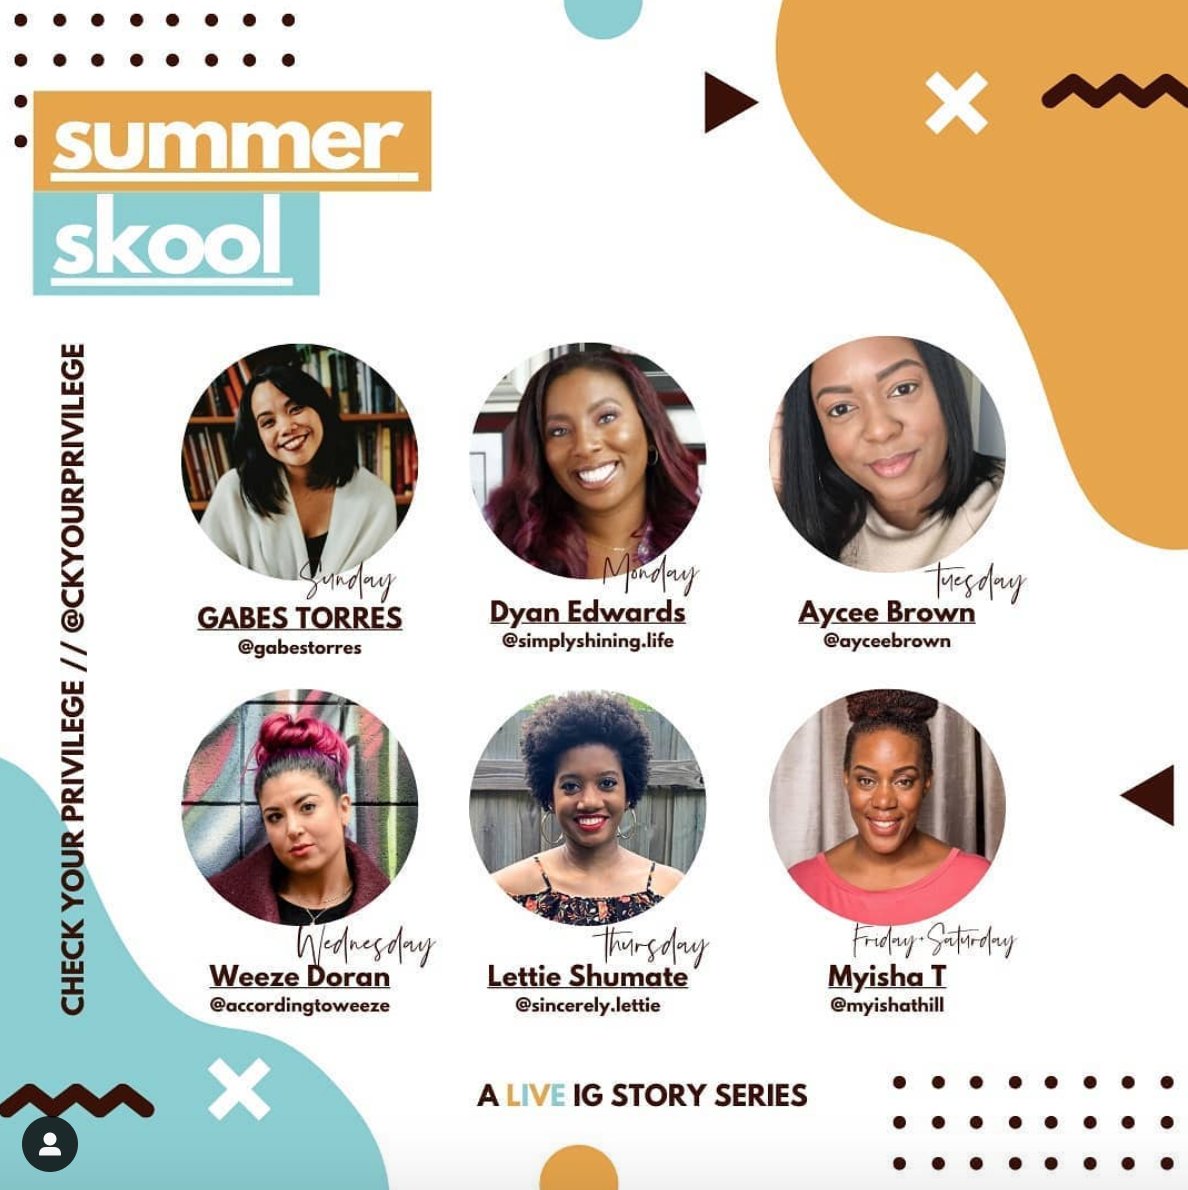 Check Your Privilege, founded by Myisha T. Hill, is a guided journey that deepens your awareness to how your actions affect the mental health of Black, Brown, & Indigenous people. Right now, they're offering a Summer  #SaturdaySkool series about anti-racism  https://bit.ly/3dm6gfV 